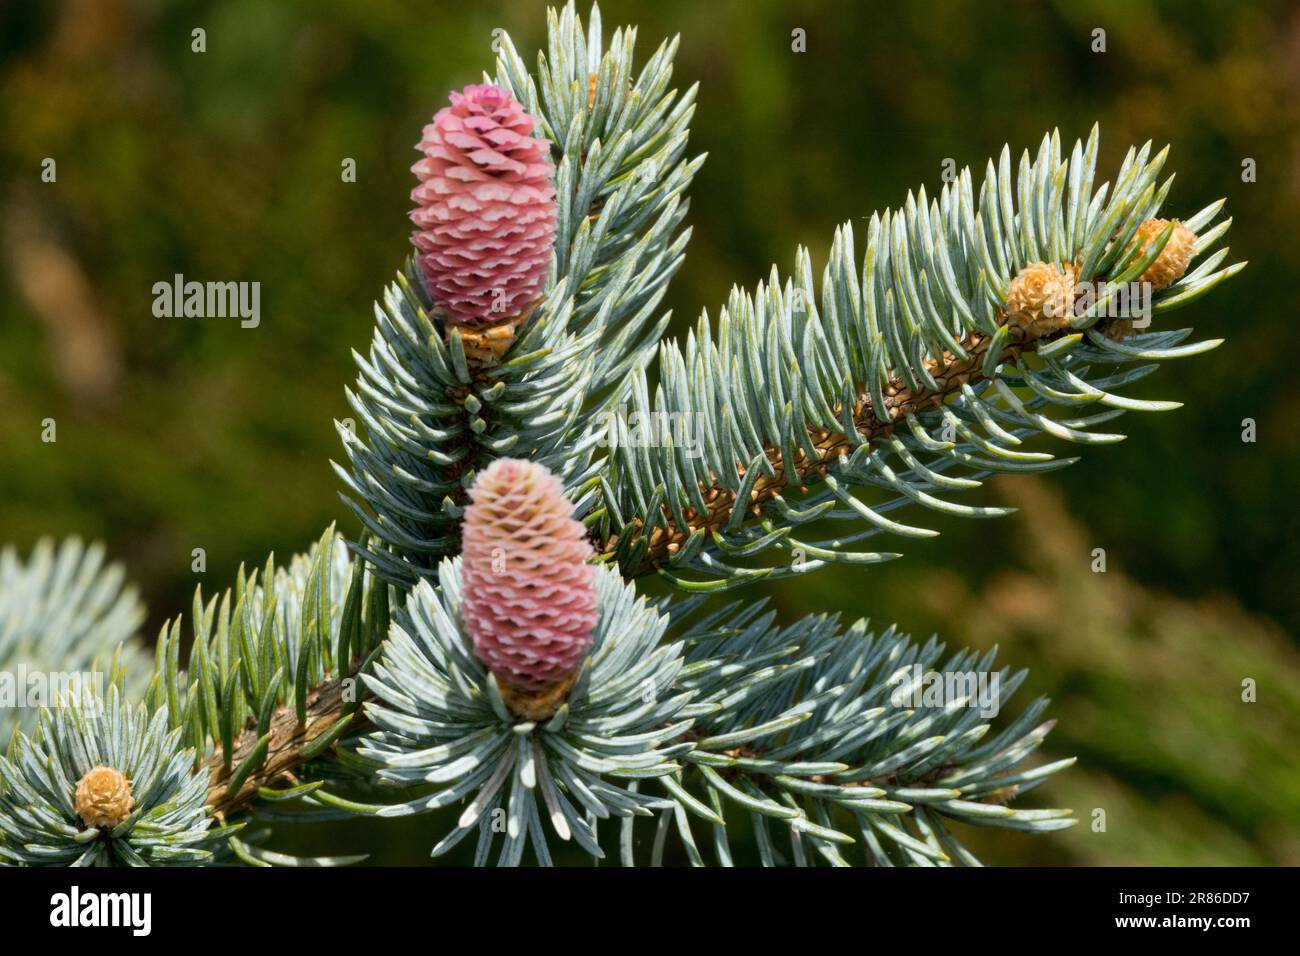 Blue Spruce Shoots Picea pungens 'Hoopsii' Picea Buds Spruce Cones Branch Needles Silver Spruce Spring Twigs Branches Colorado Blue Spruce Sprouts Stock Photo